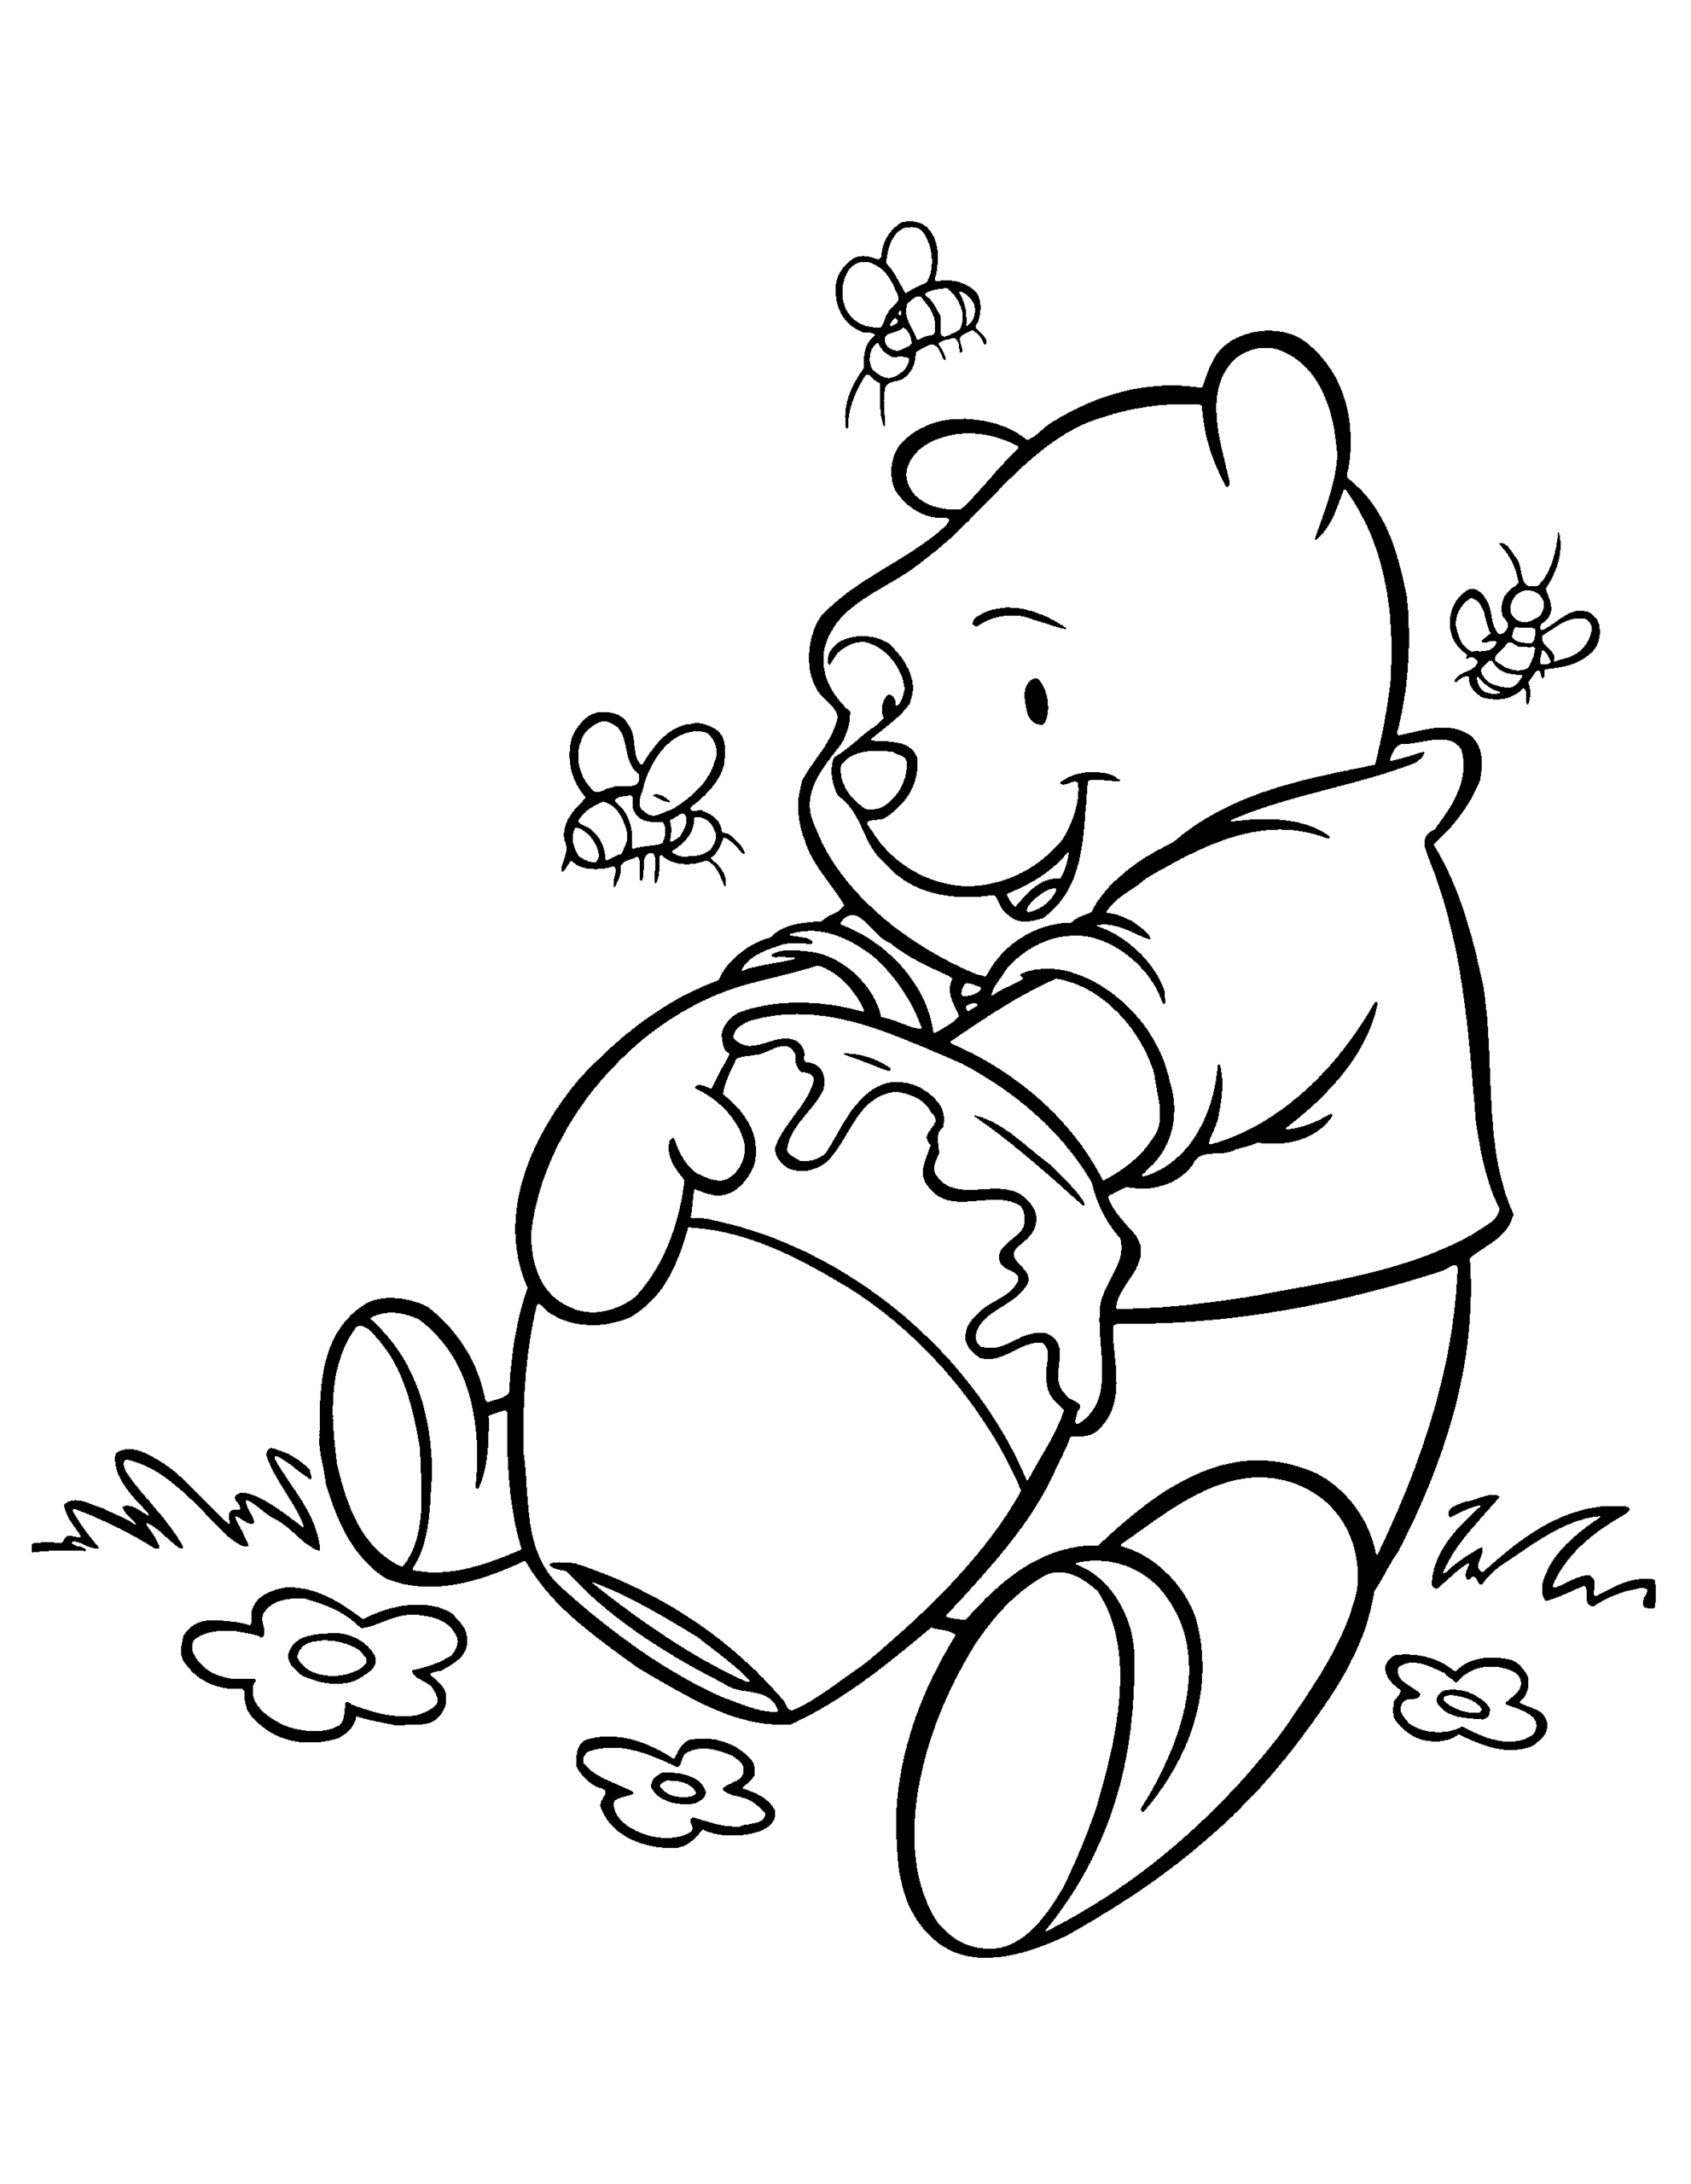 Winnie the Pooh Coloring Pages Cartoons winnie the pooh 114 Printable 2020 7094 Coloring4free